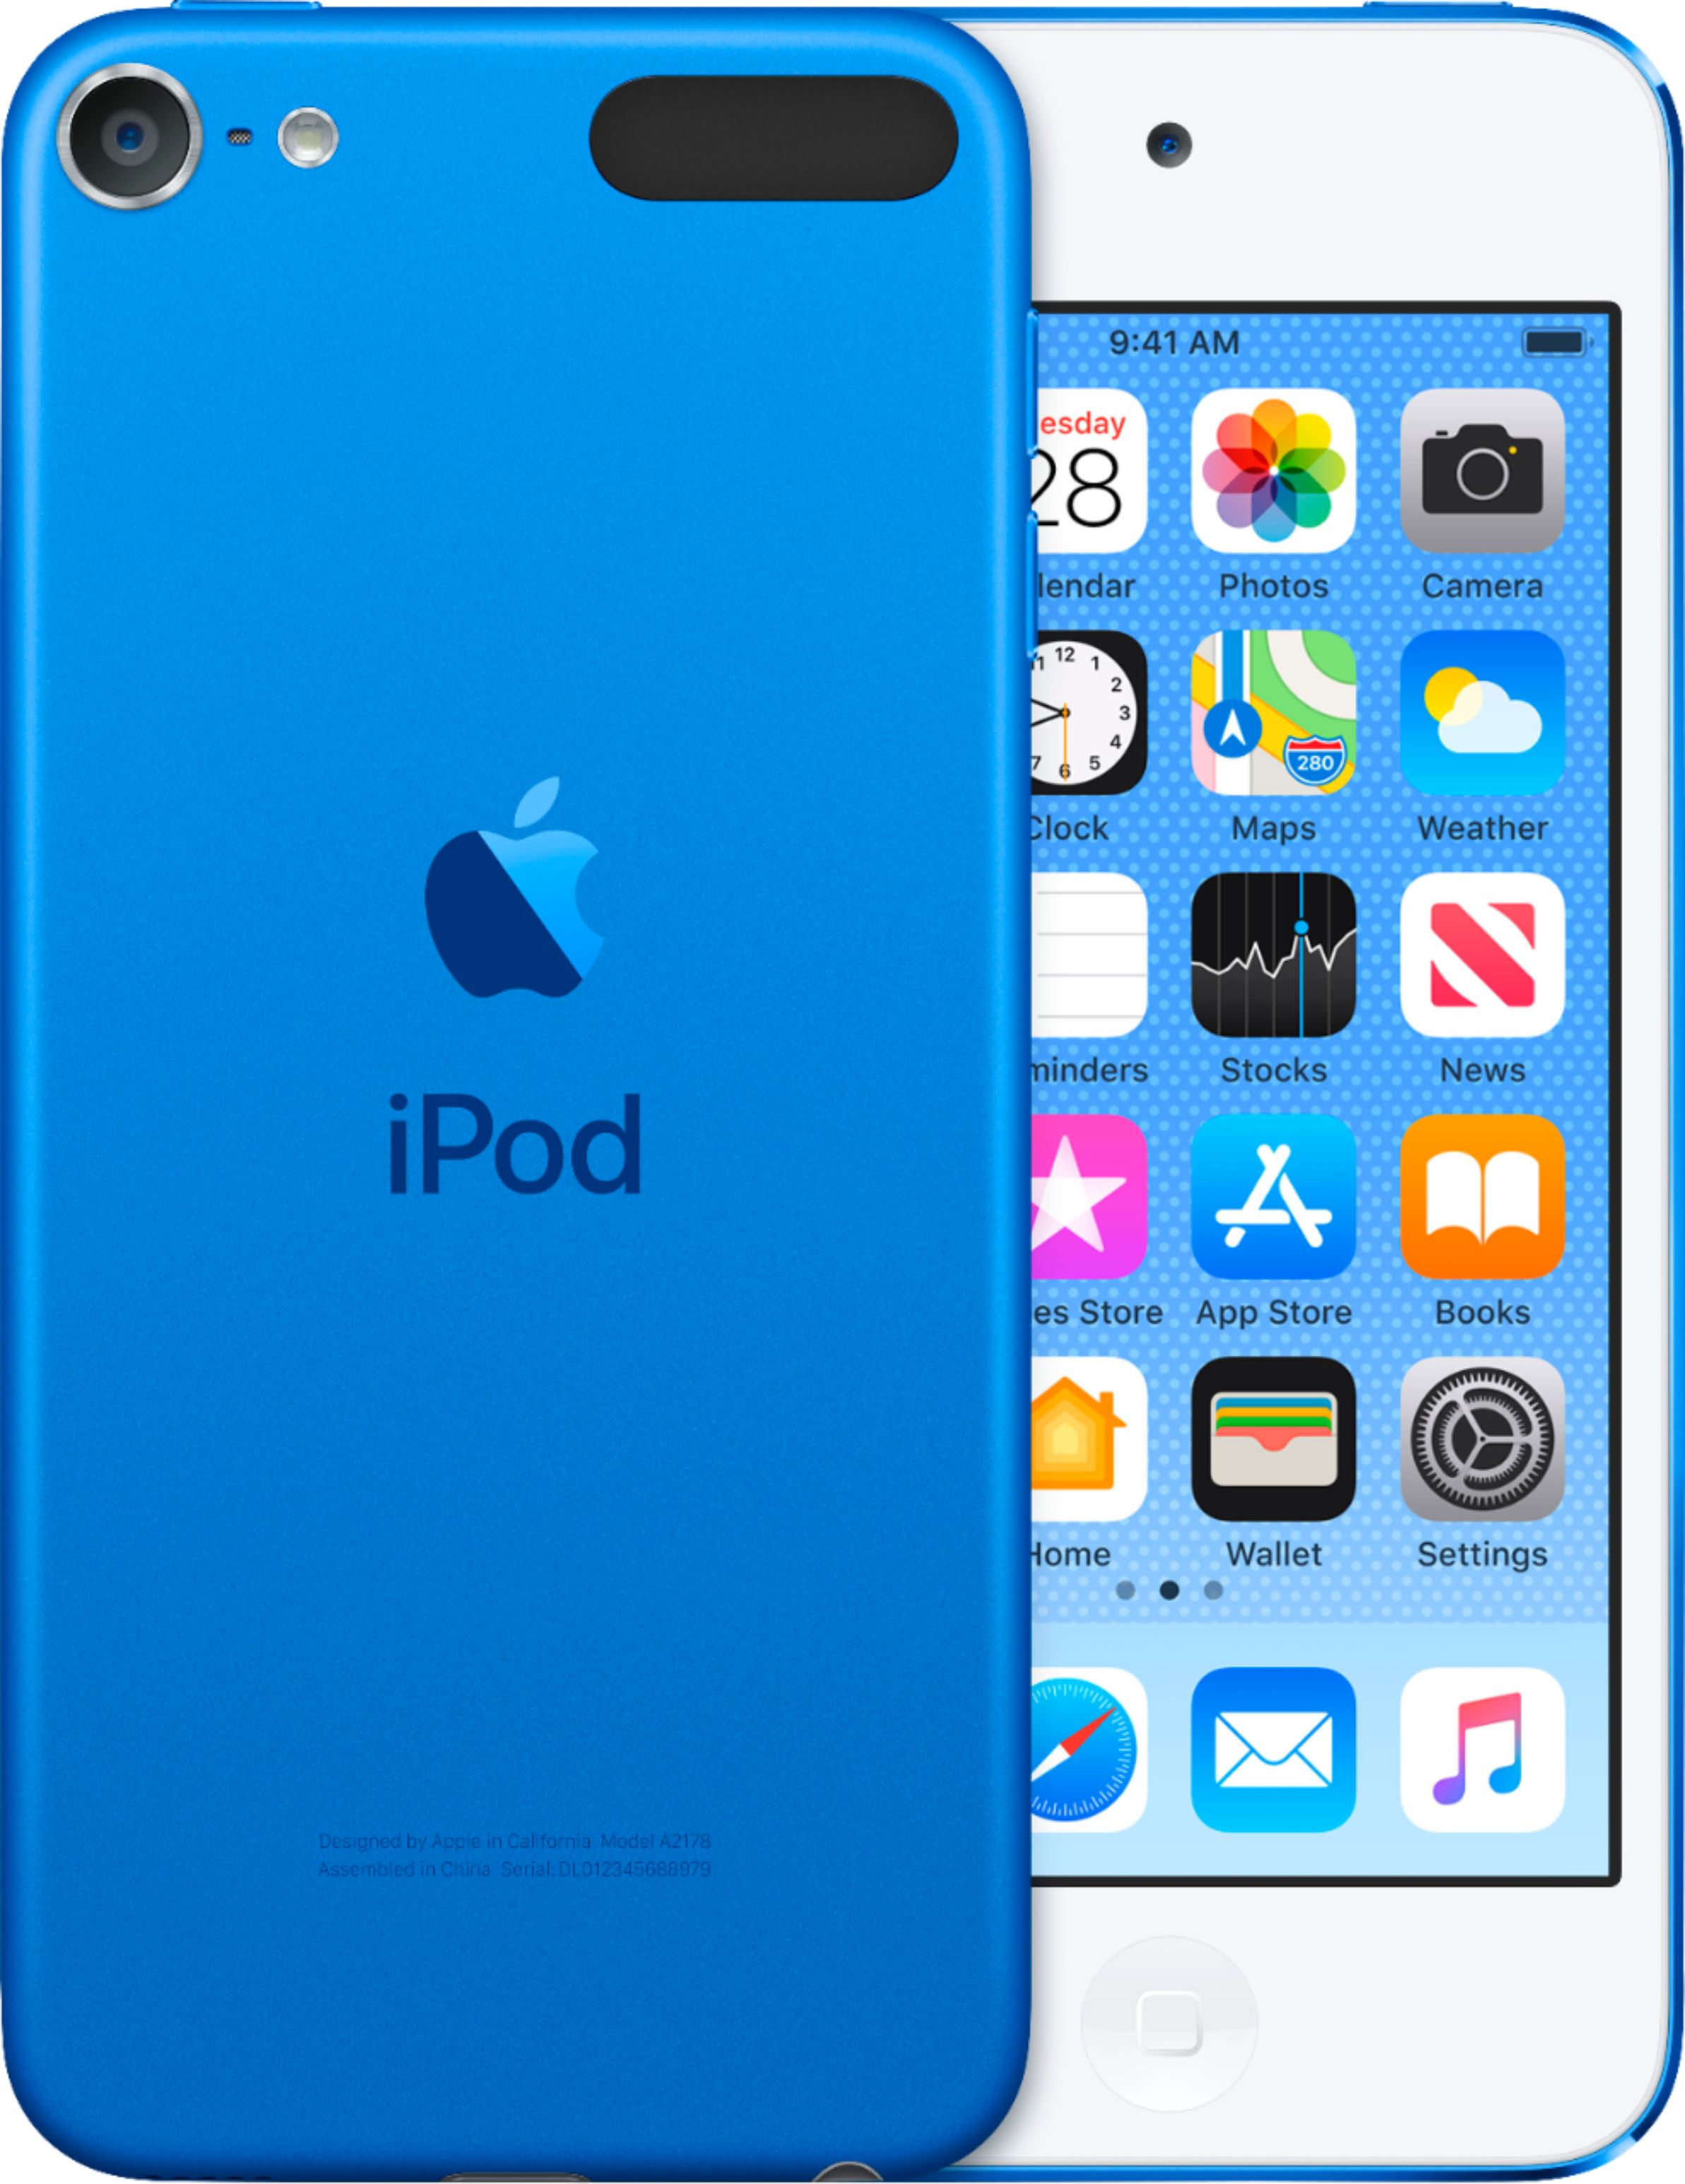 download the new version for ipod Infuse 7 PRO